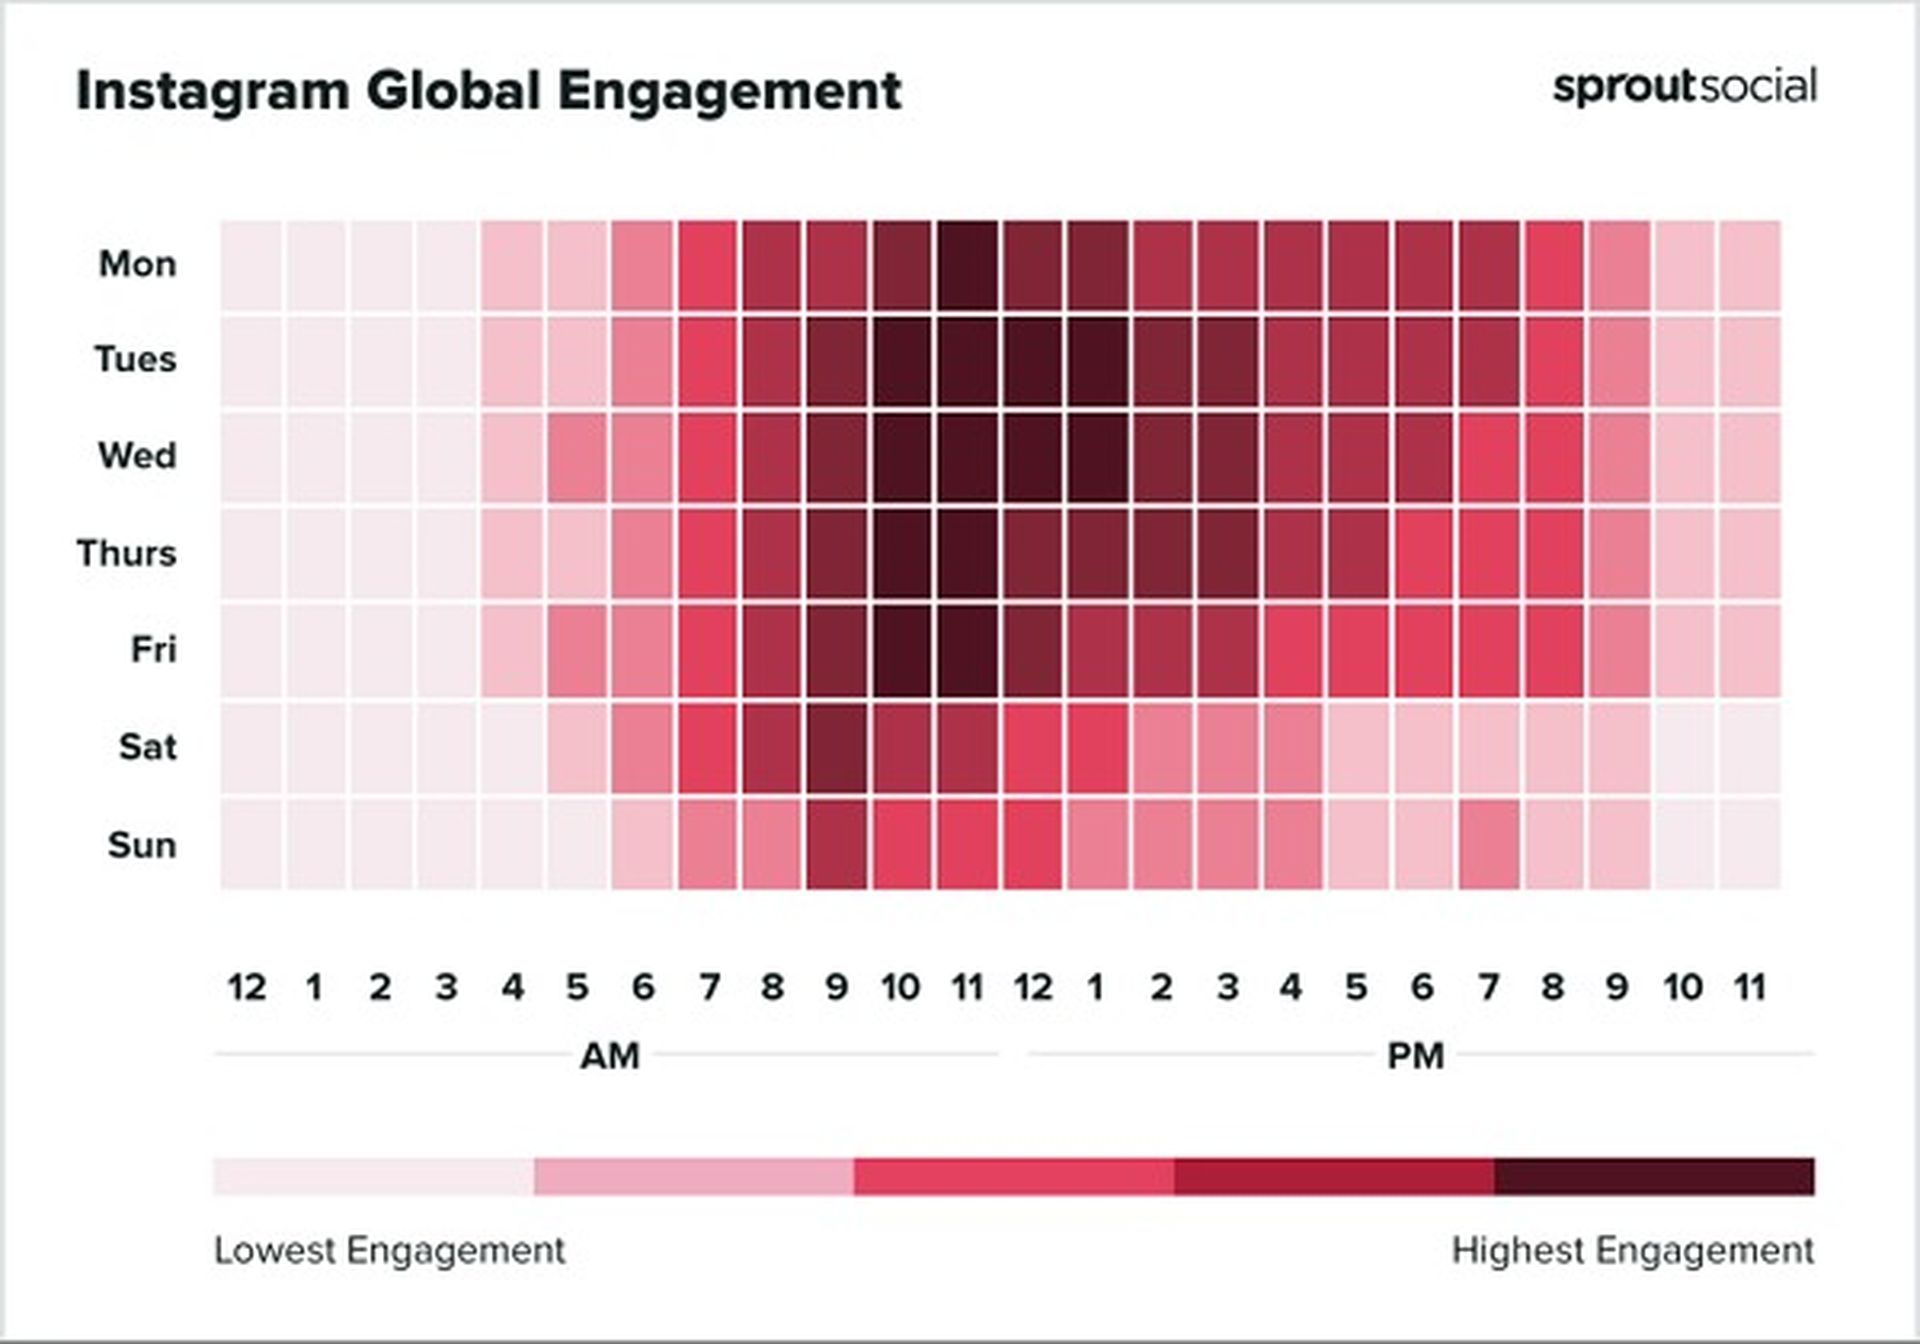 Sprout study reveals the best times to post on social media in 2022, so if you are going to post on Facebook, Instagram, Twitter, and LinkedIn, check this out.